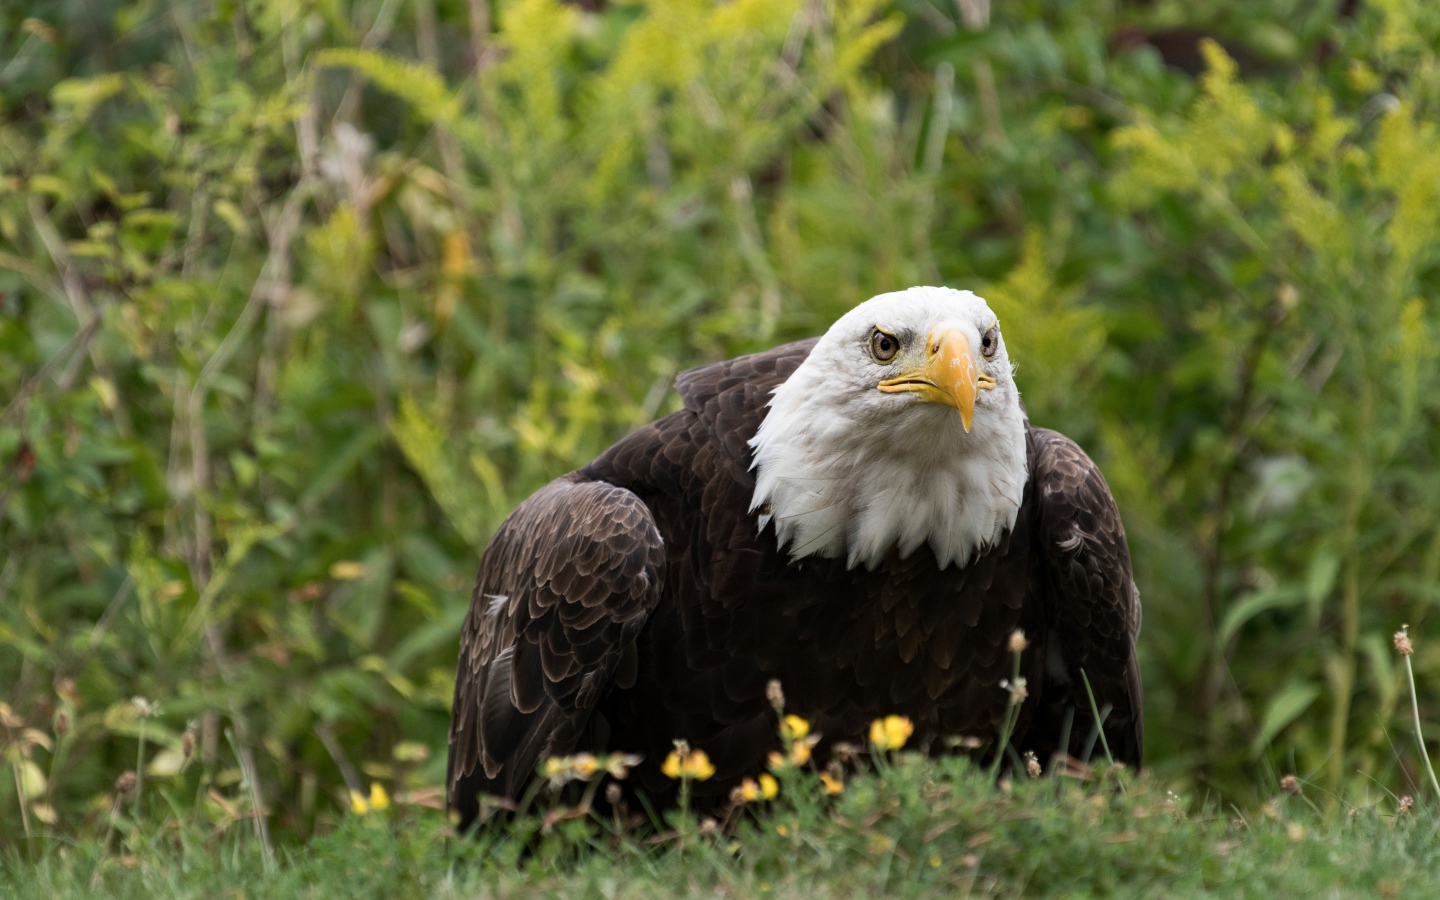 A large predatory bald eagle sits in the grass.